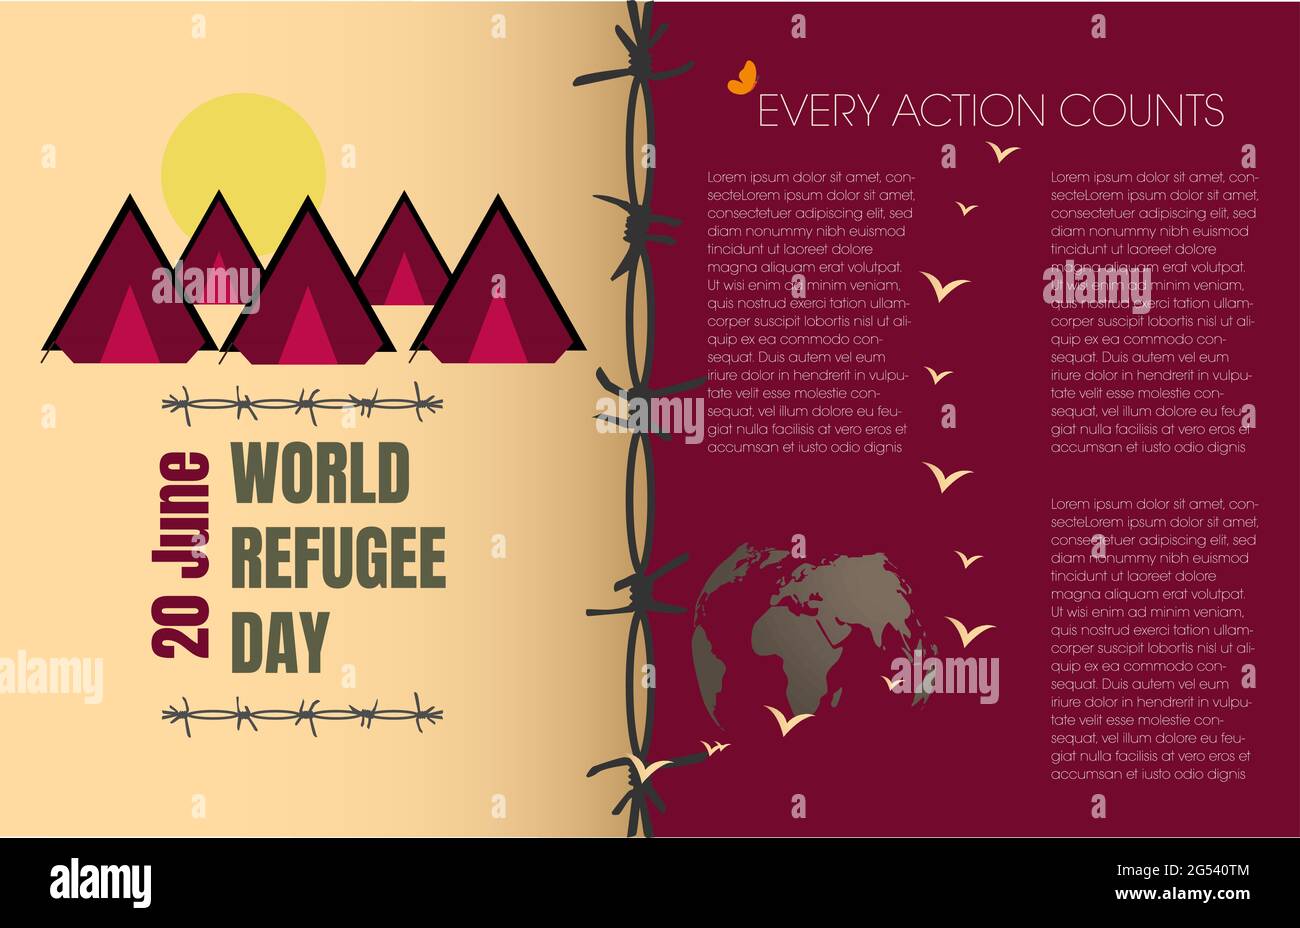 International refugee day with icons of tents and barbed wire , right copyspace .Colors in earth tones and reddish tones. Slogan all action counts  Ve Stock Vector